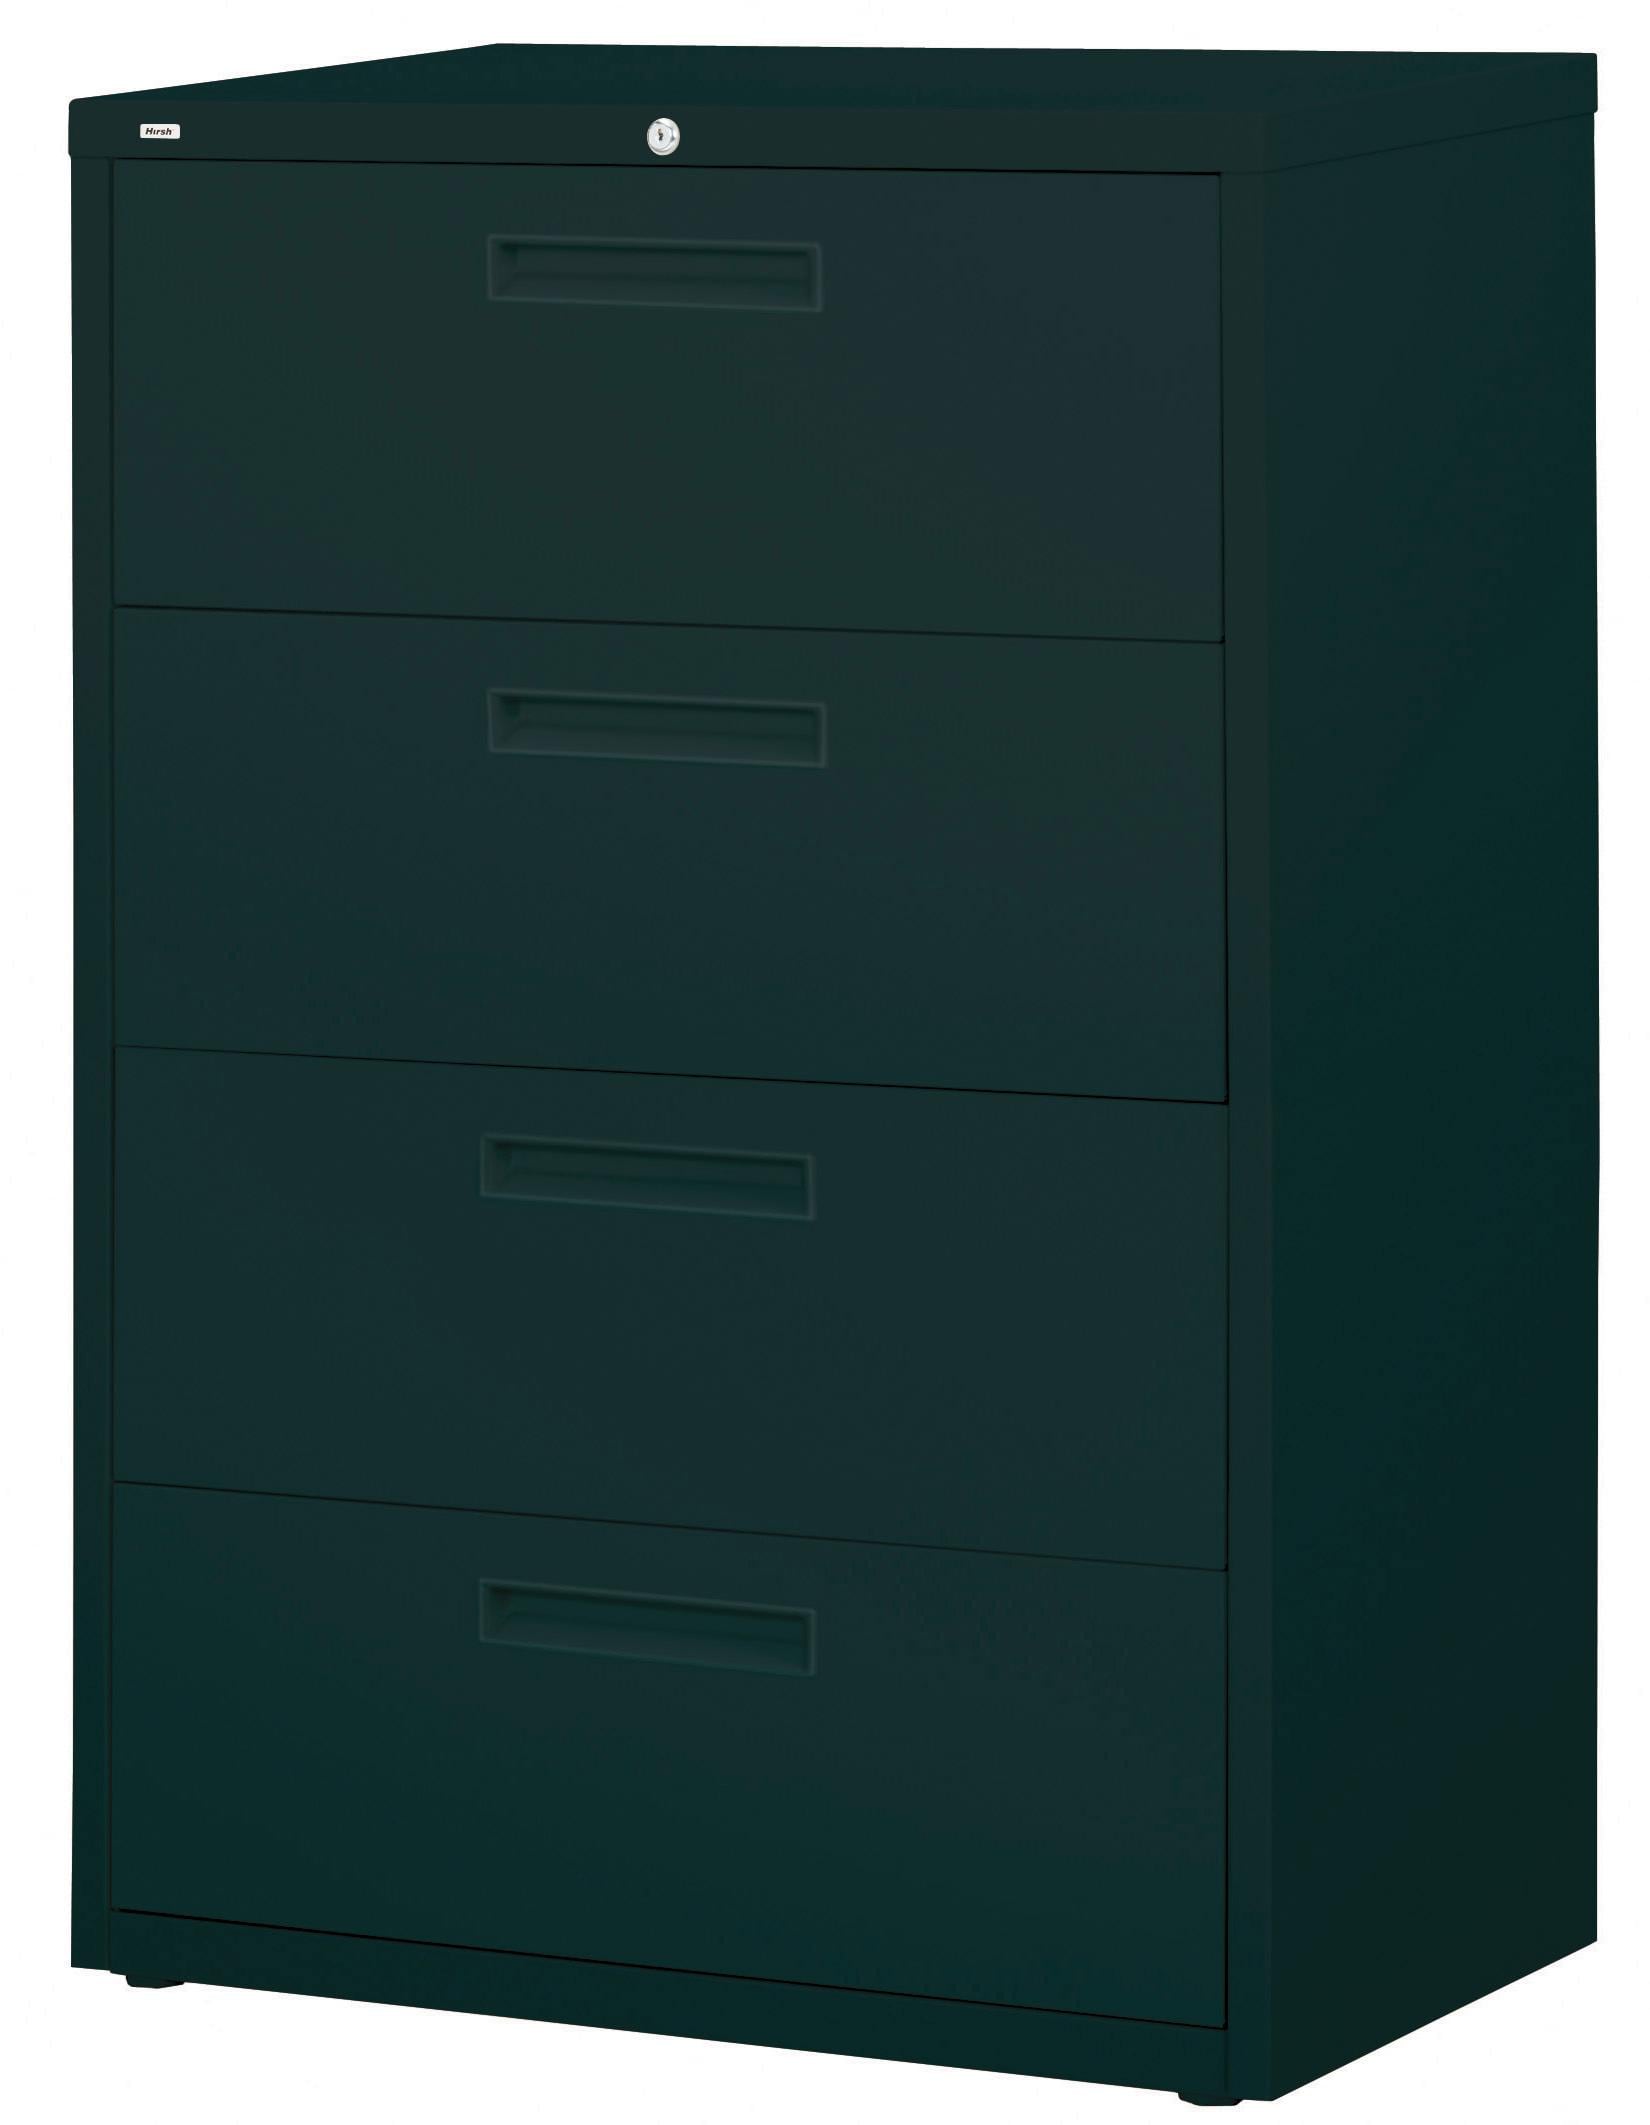 Hirsh HL5000 Series 36inch wide 4drawer Commercial Lateral File